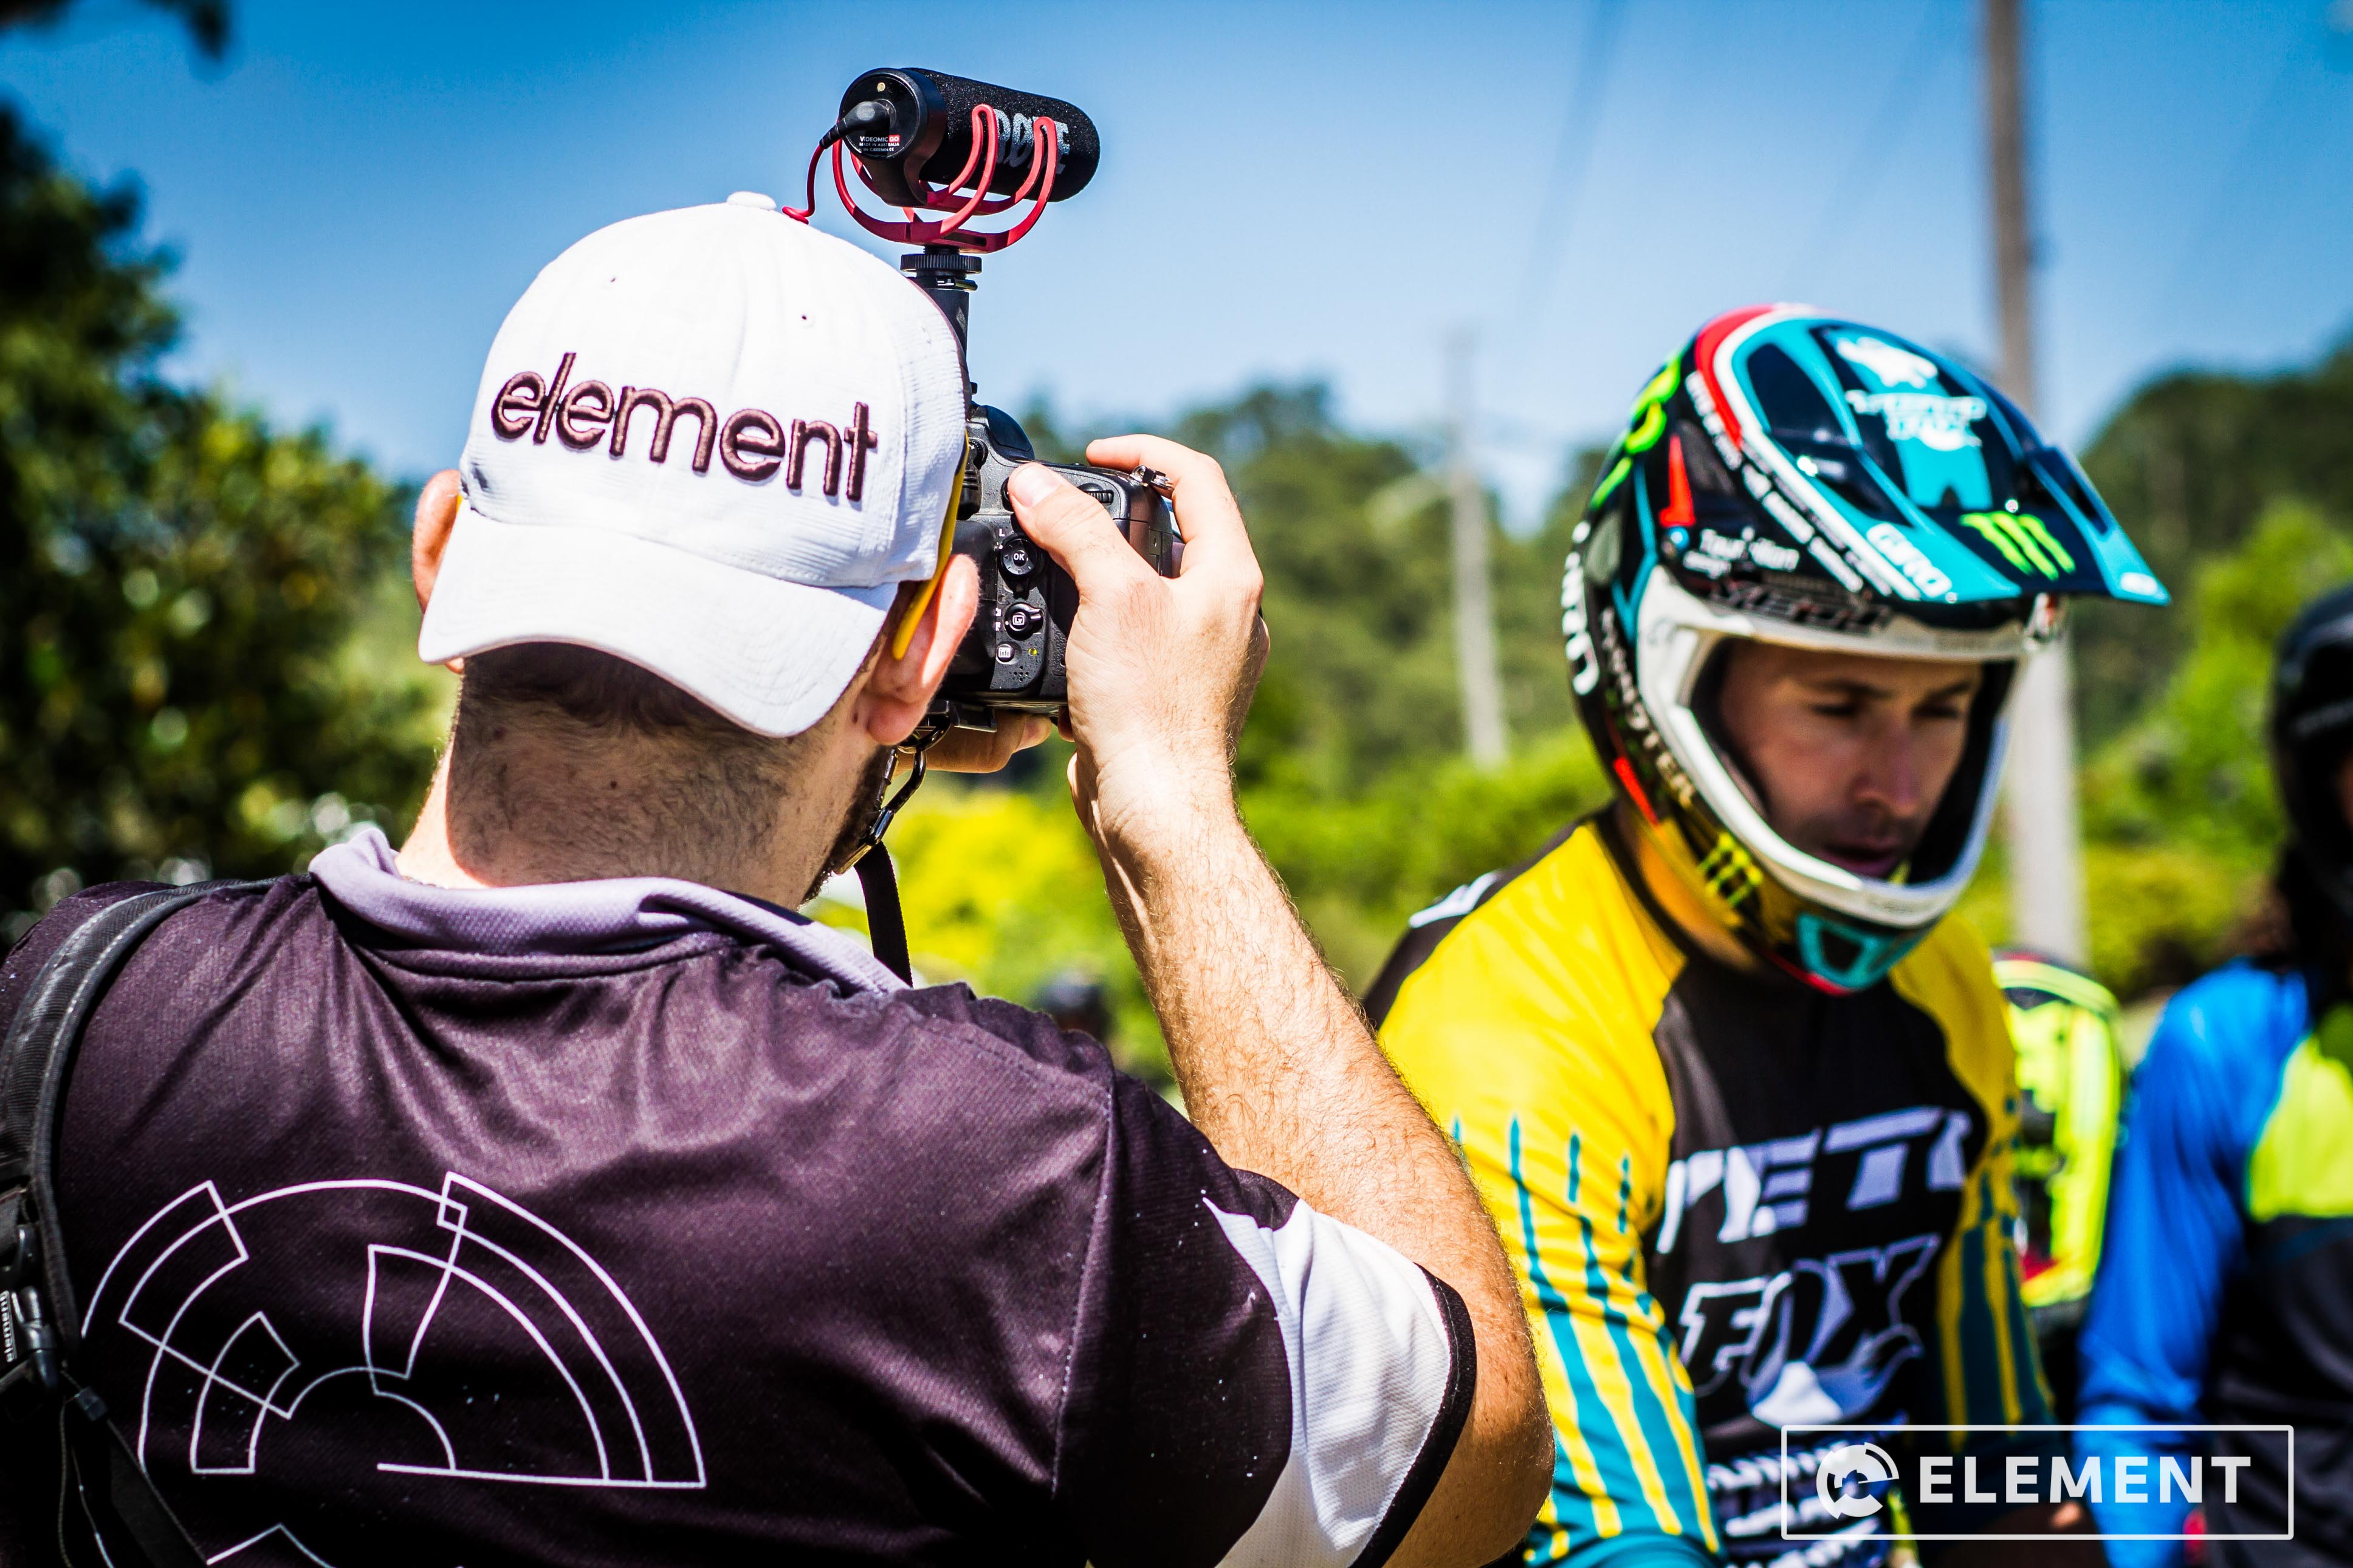 Photos from the Rockshox Enduro Challenge Round 2 in Toowoomba, 8-3-2015.